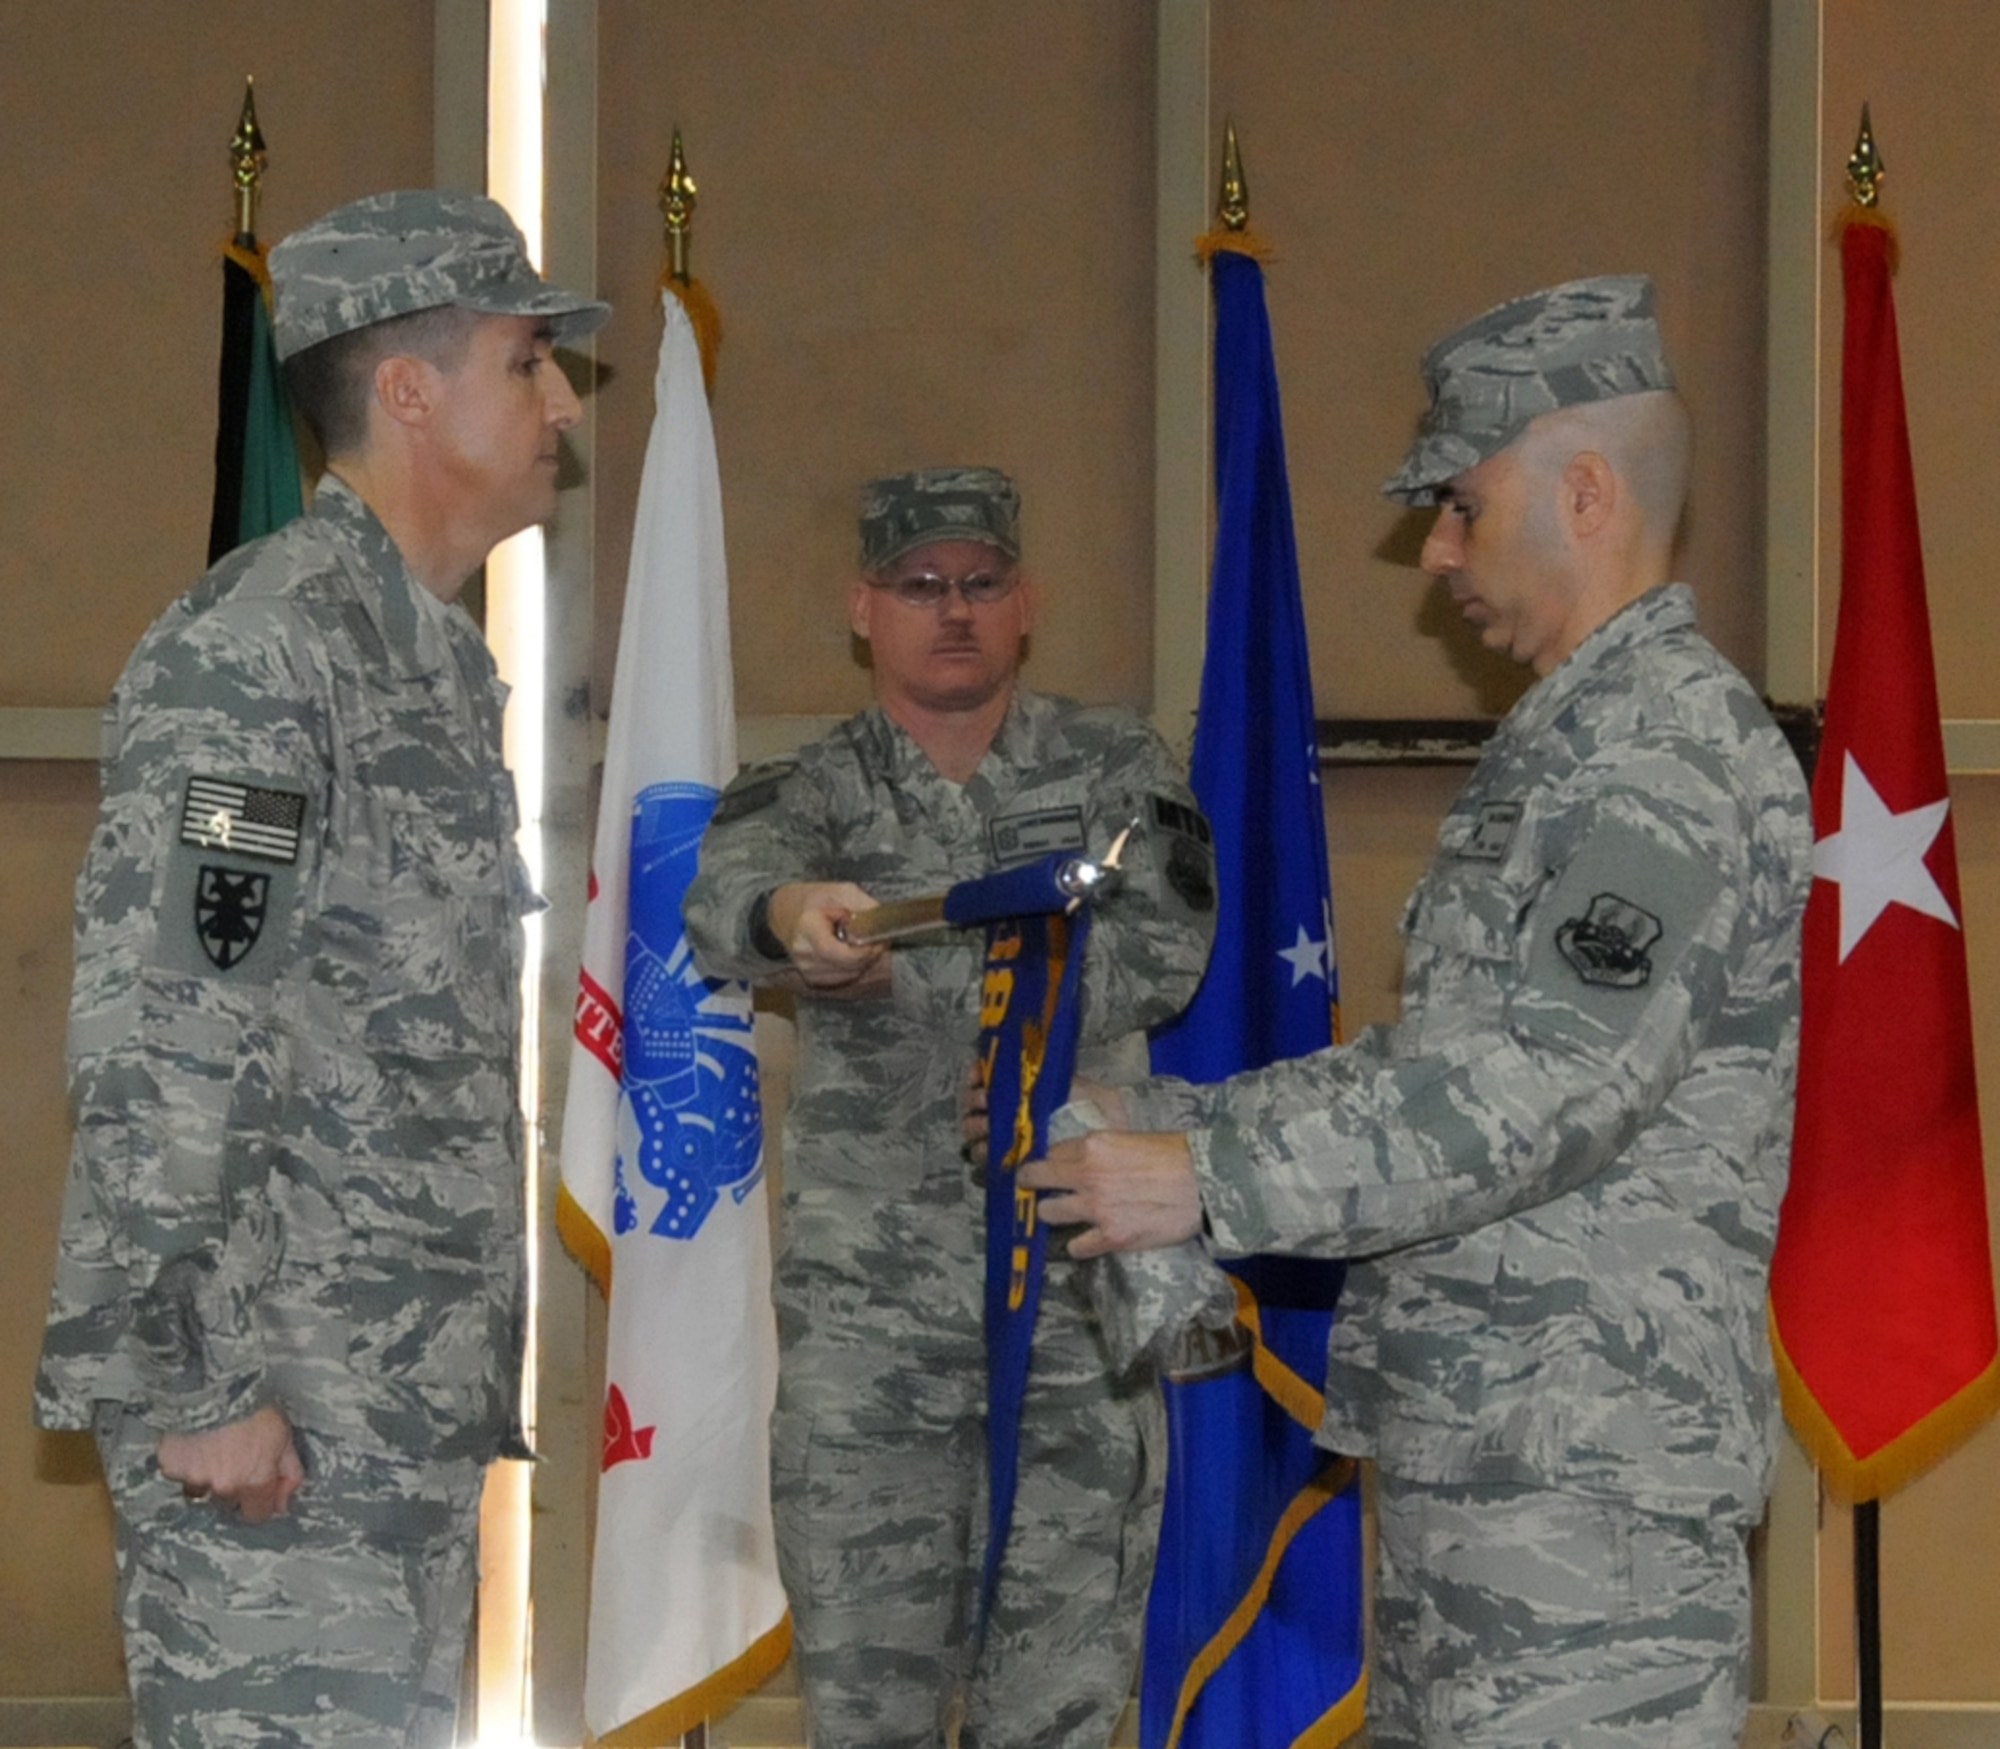 U.S. Air Force Lt. Col. John O'Connor, commander of the 387th Expeditionary Logistics Readiness Squadron, furls his squadron's colors during an inactivation ceremony at an undisclosed location in Southwest Asia, March 6, 2012. The 387th ELRS participated in the largest retrograde of cargo and personnel since World War II; U.S. Central Command approved the 387th ELRS as "mission complete" and authorized them to inactivate on Dec. 20, 2011. (U.S. Air Force photo by Staff Sgt. James Lieth/Released)